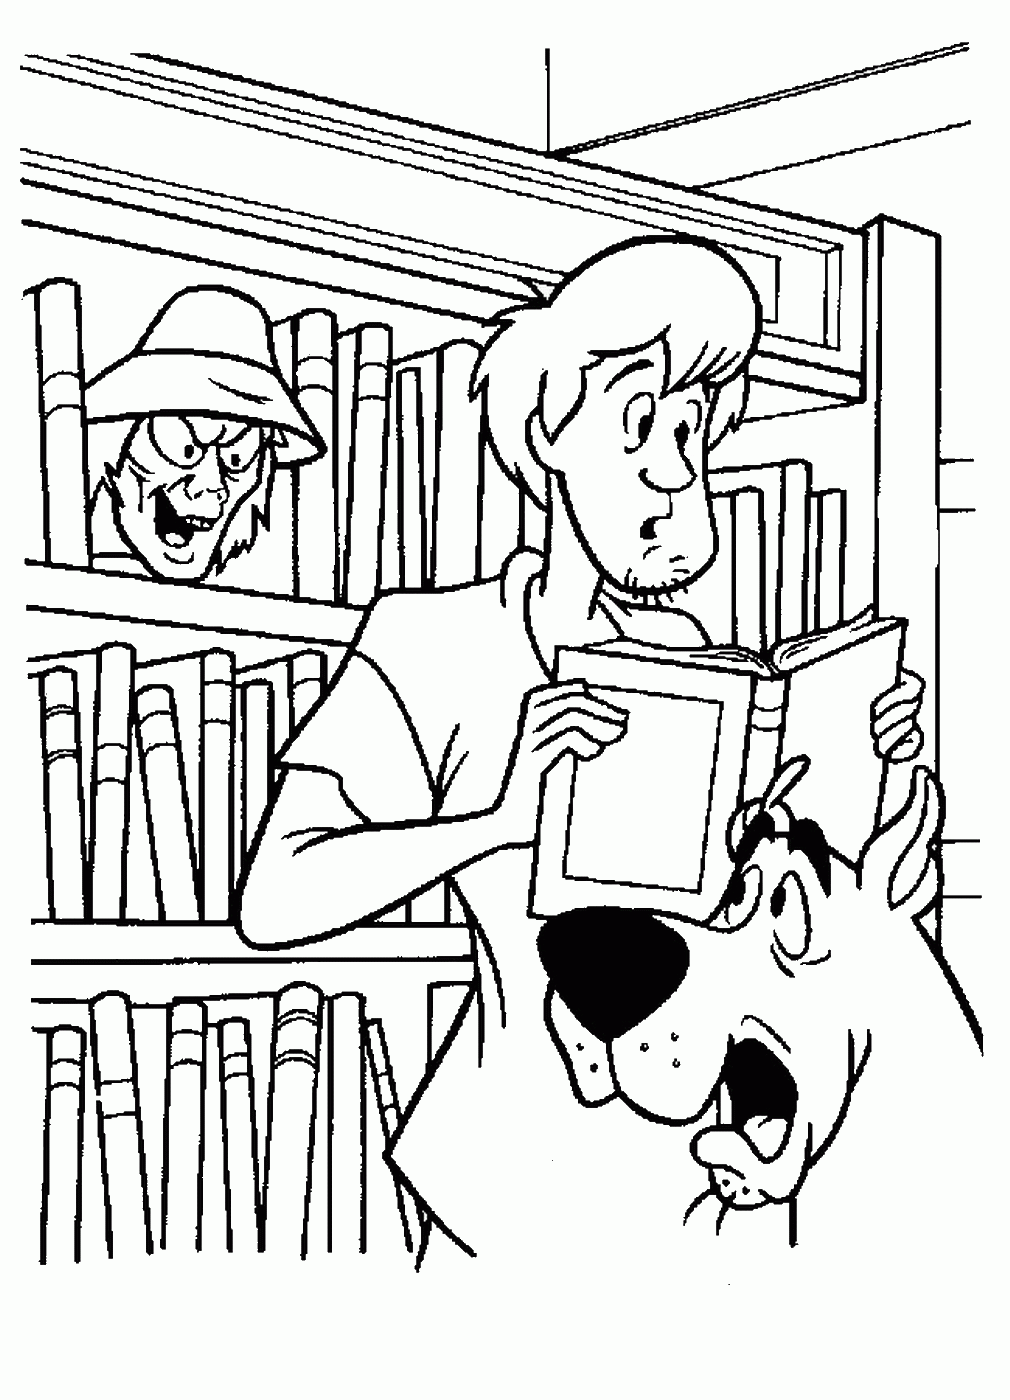 Scooby Doo Coloring Pages TV Film scooby_doo_cl_28 Printable 2020 07275 Coloring4free